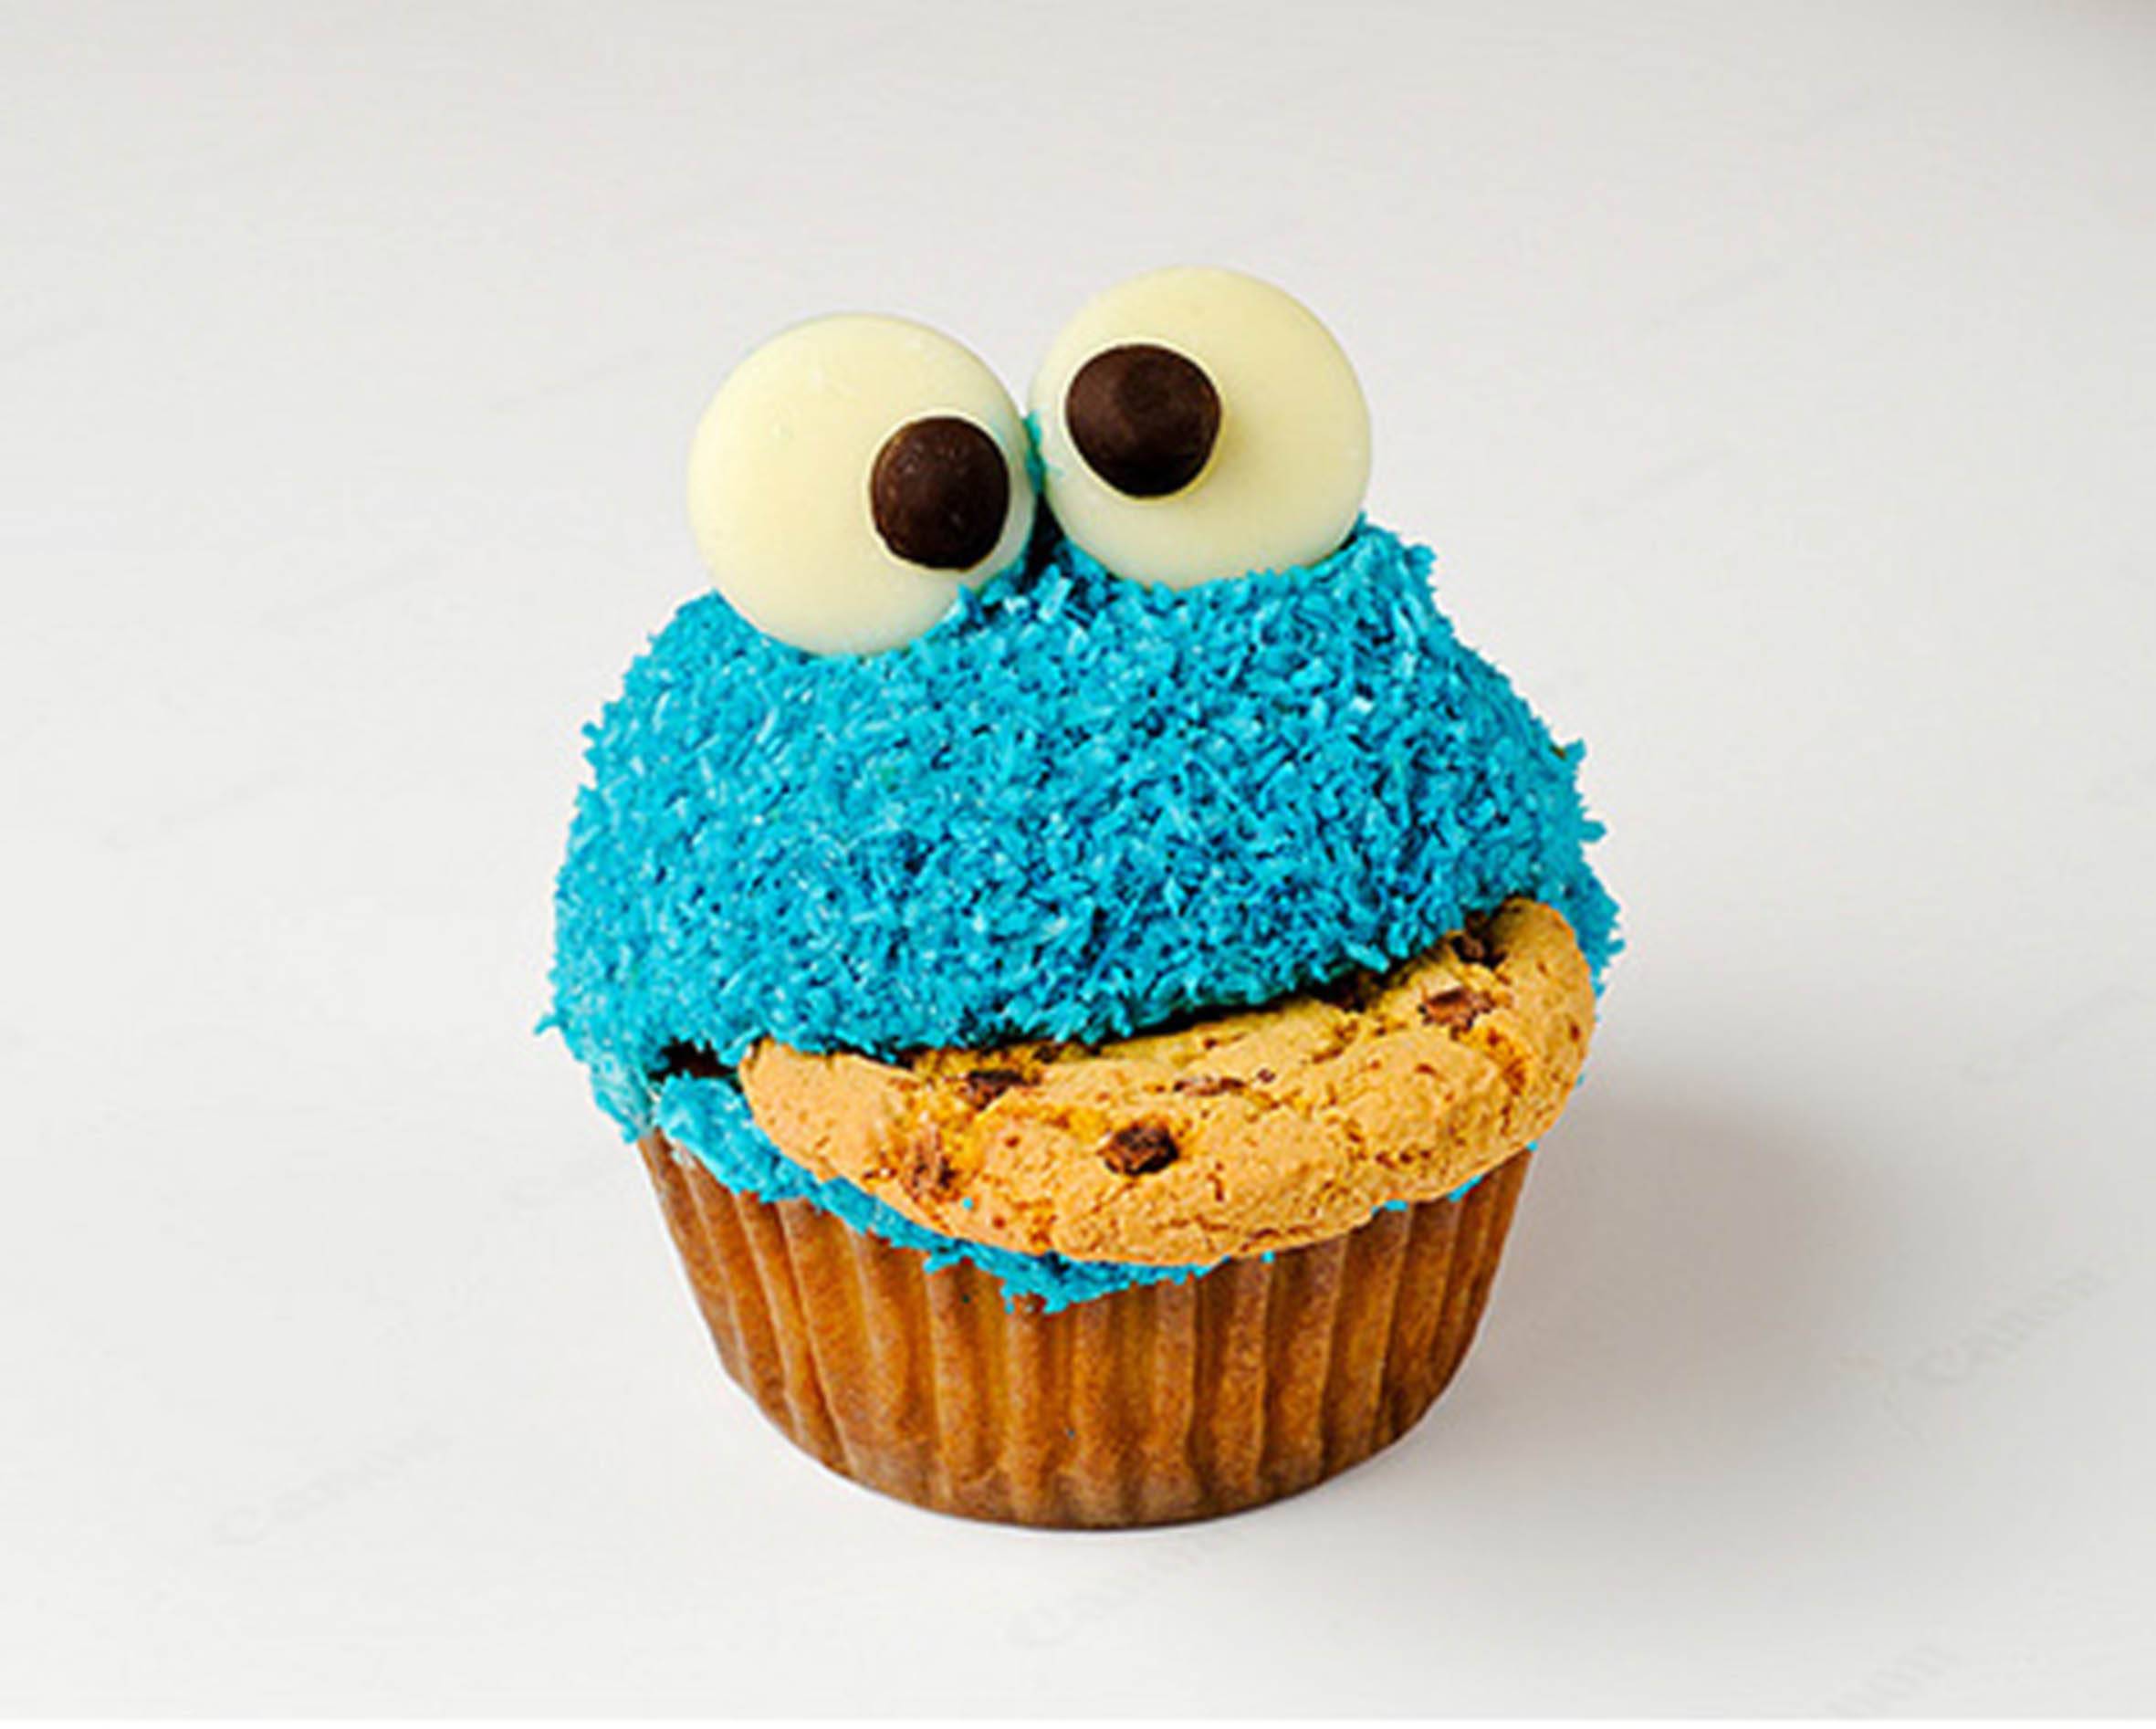 Cookie monster wallpaper - - High Quality and Resolution